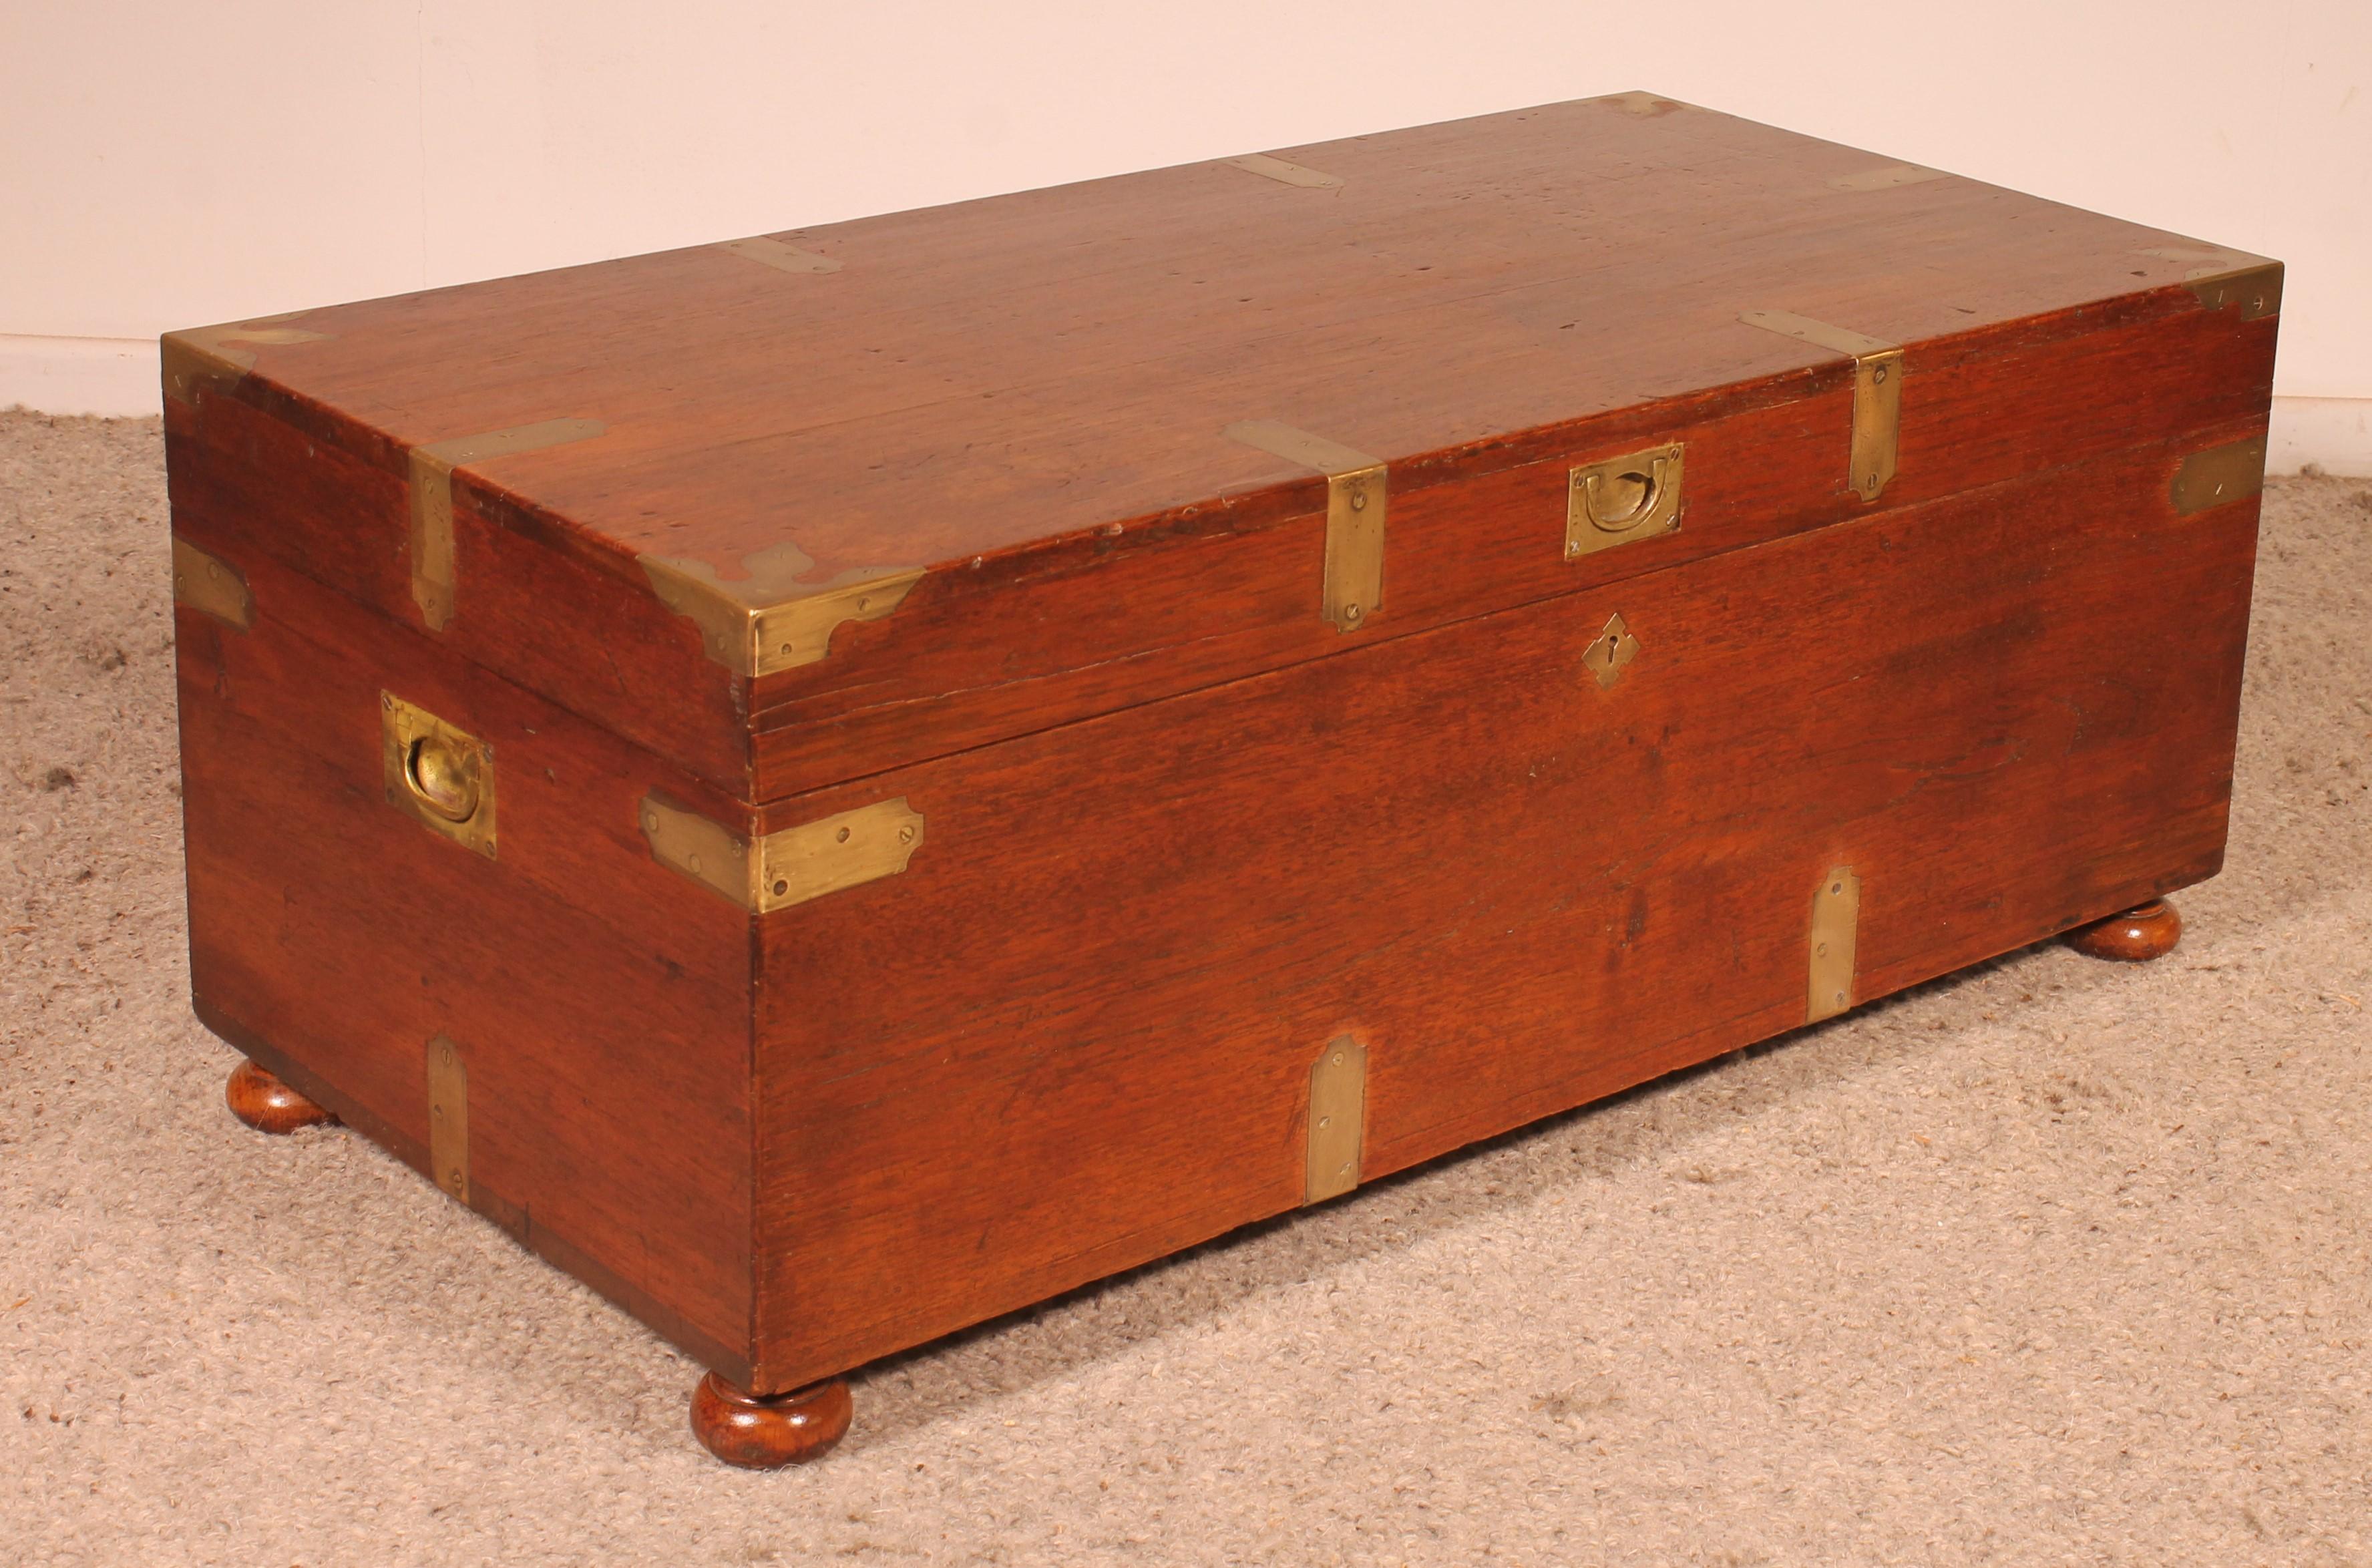 Teak Campaign Or Marine Chest From The 19th Century 6